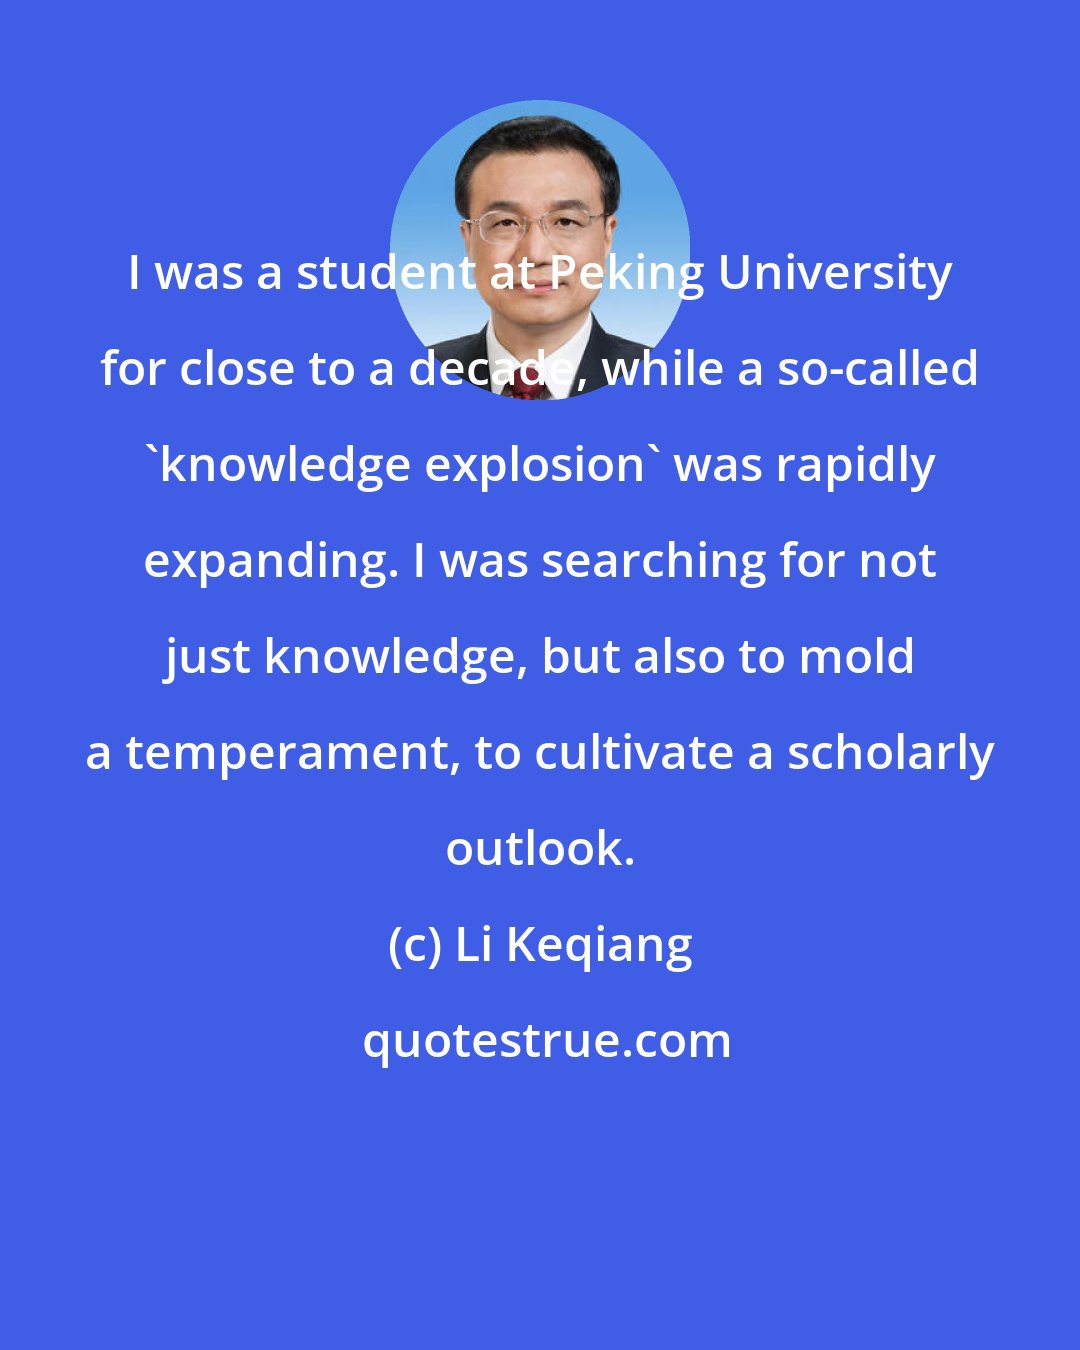 Li Keqiang: I was a student at Peking University for close to a decade, while a so-called 'knowledge explosion' was rapidly expanding. I was searching for not just knowledge, but also to mold a temperament, to cultivate a scholarly outlook.